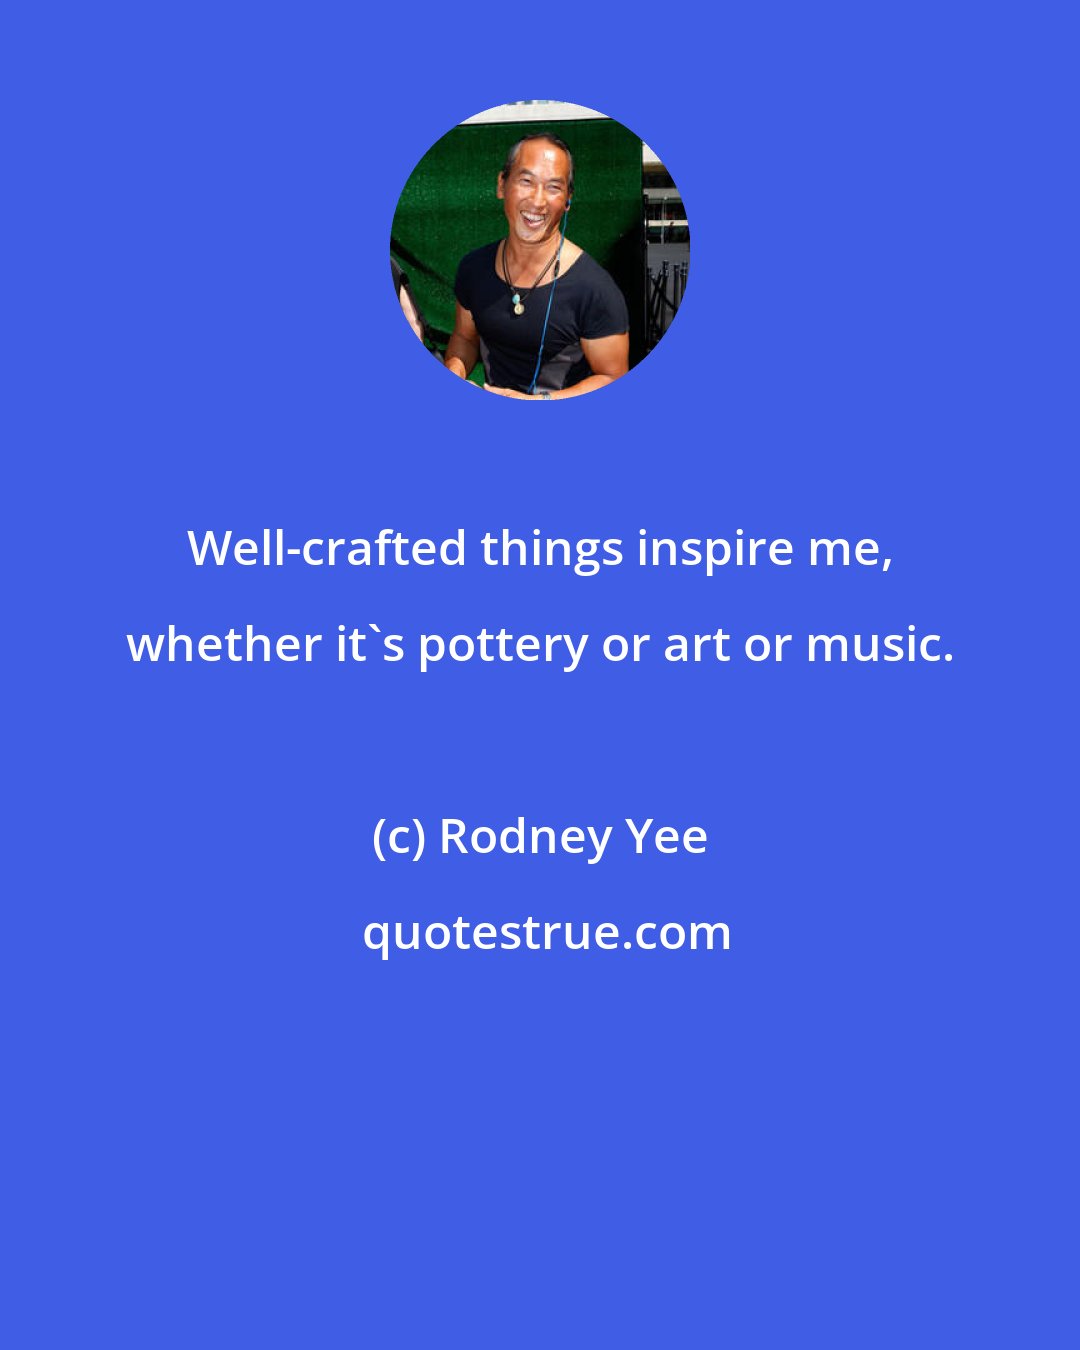 Rodney Yee: Well-crafted things inspire me, whether it's pottery or art or music.